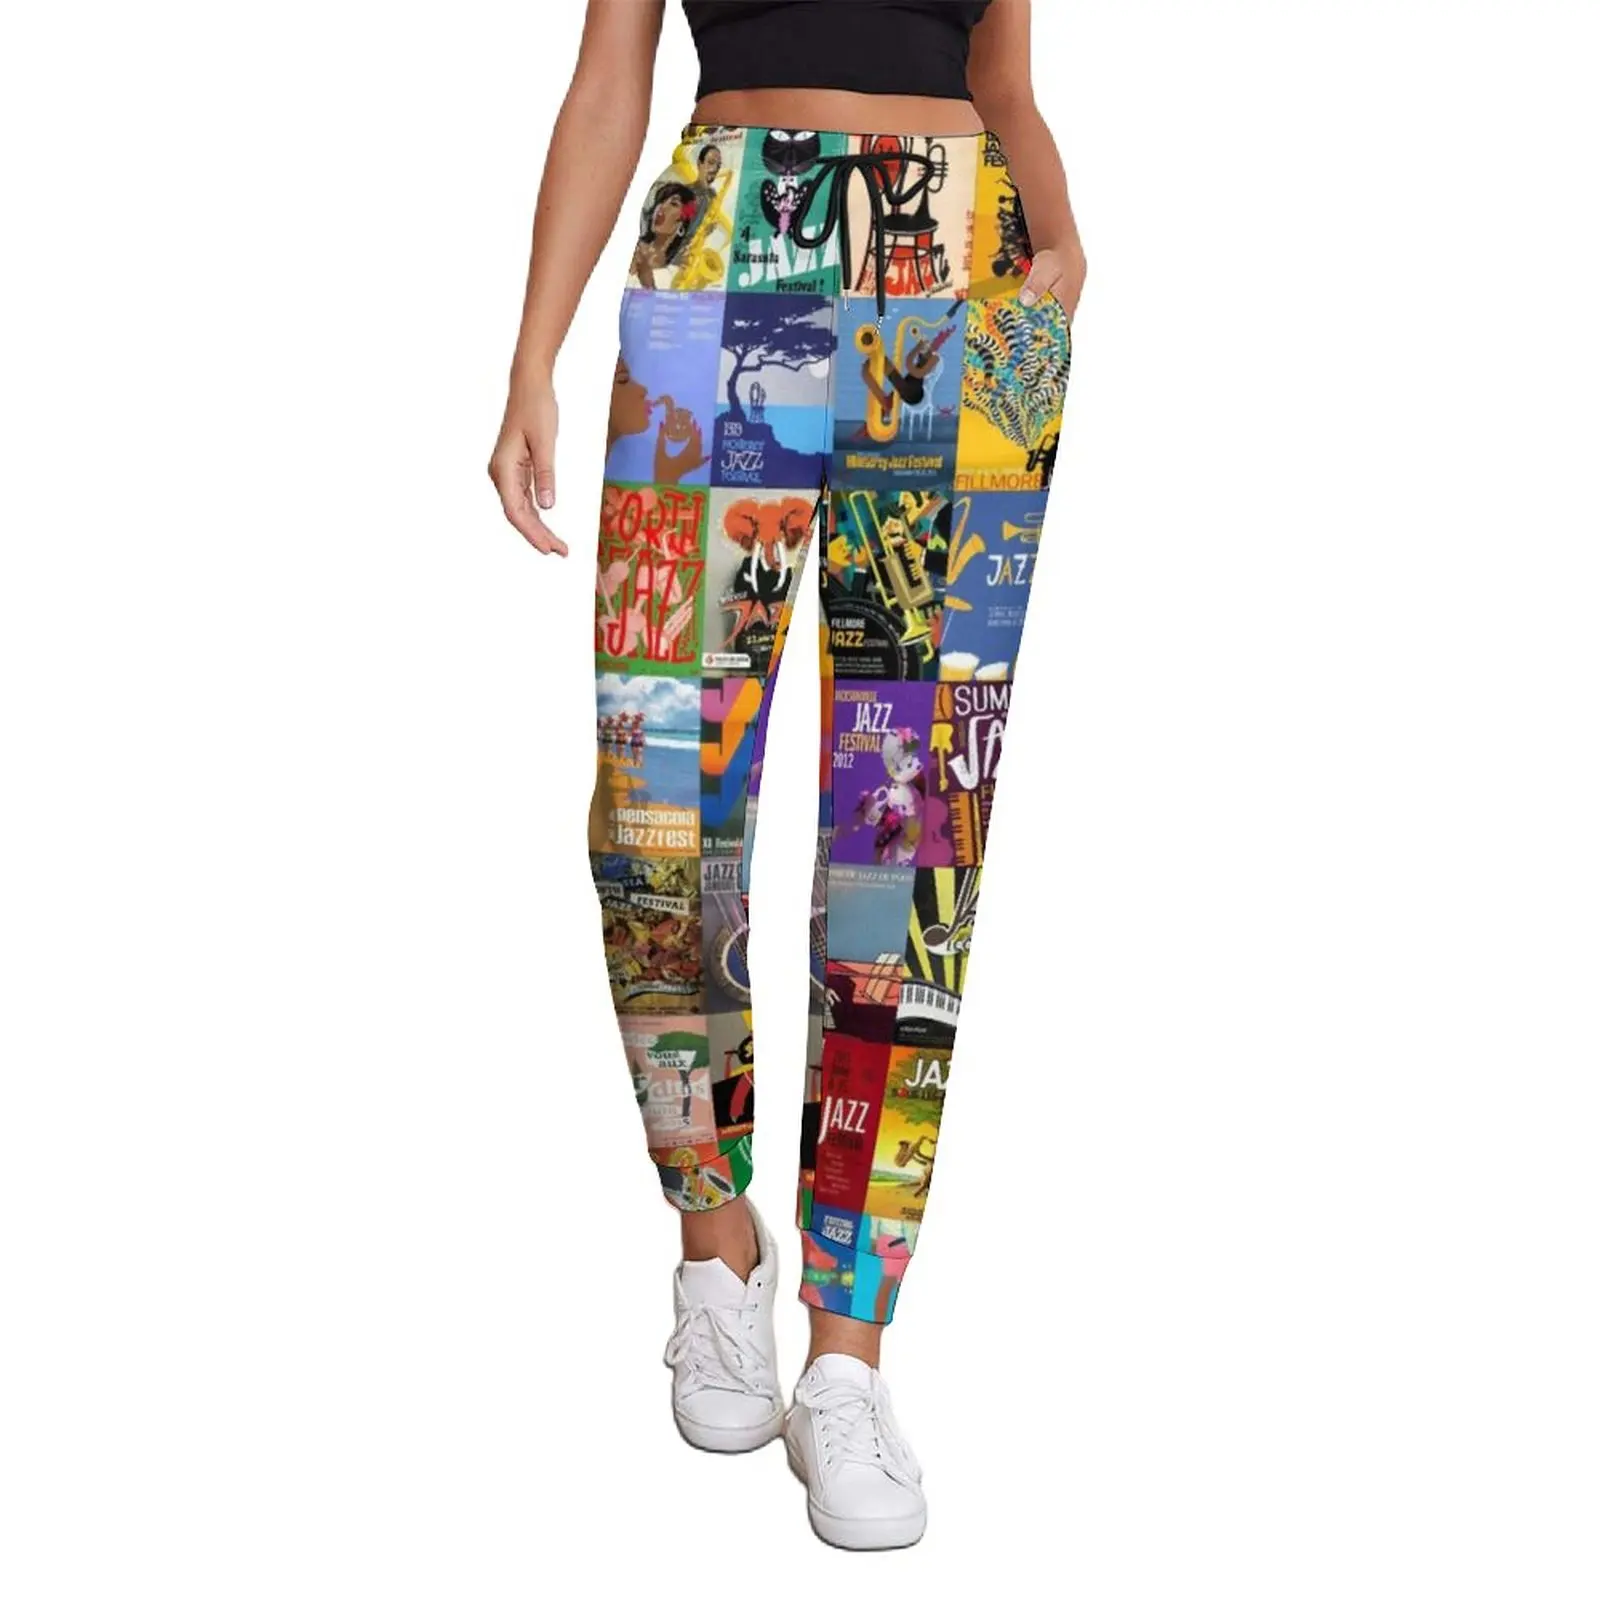 

Jazz Festivals Pants New Orleans Music Harajuku Joggers Spring Woman Modern Design Oversize Trousers Gift Idea